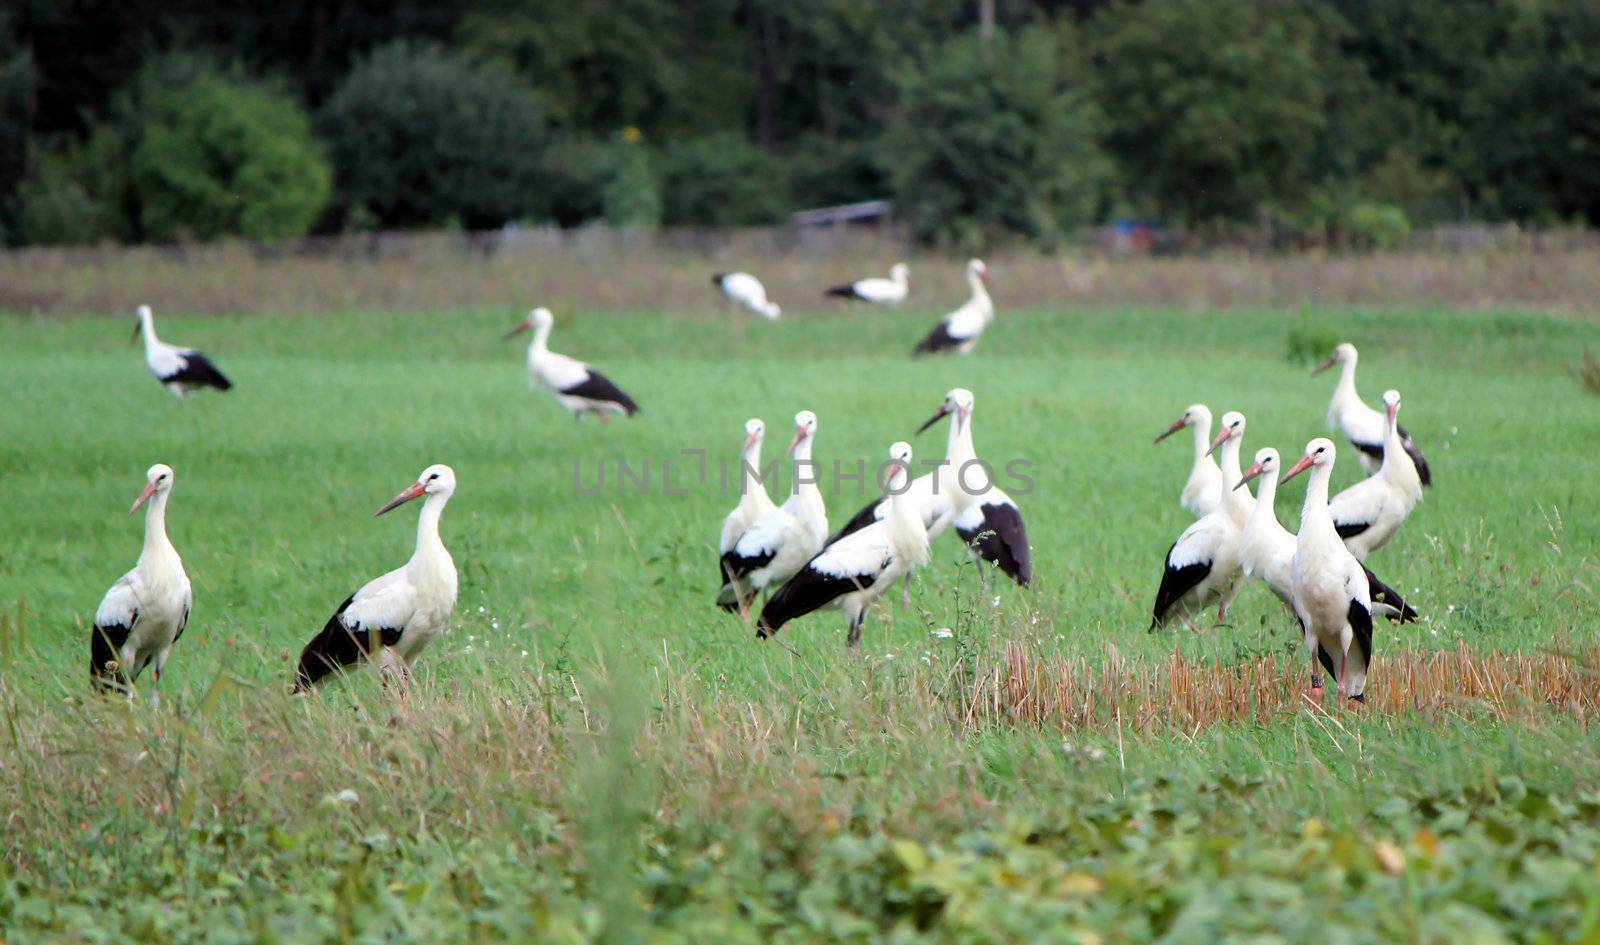 Several black and white migrating storks standing in a green field